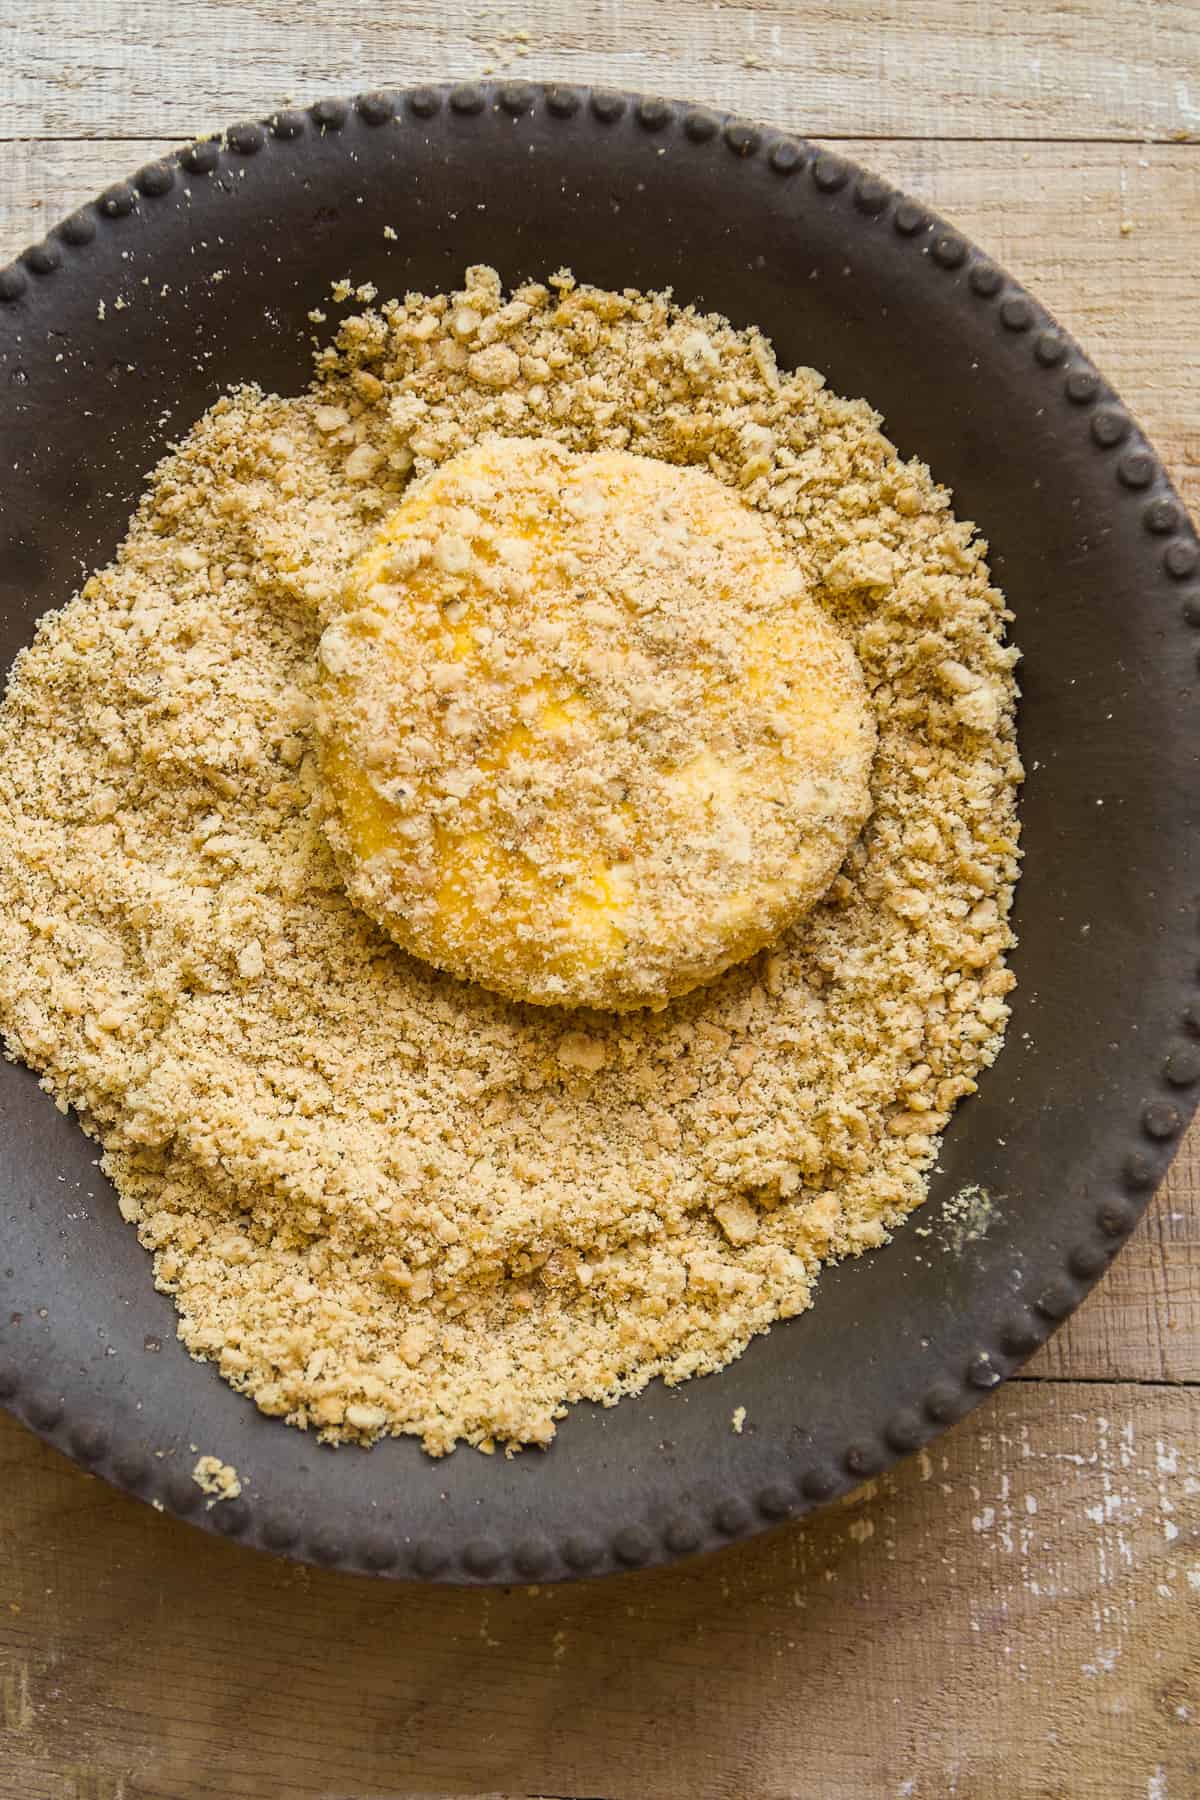 Goat cheese patty covered in crushed crackers.